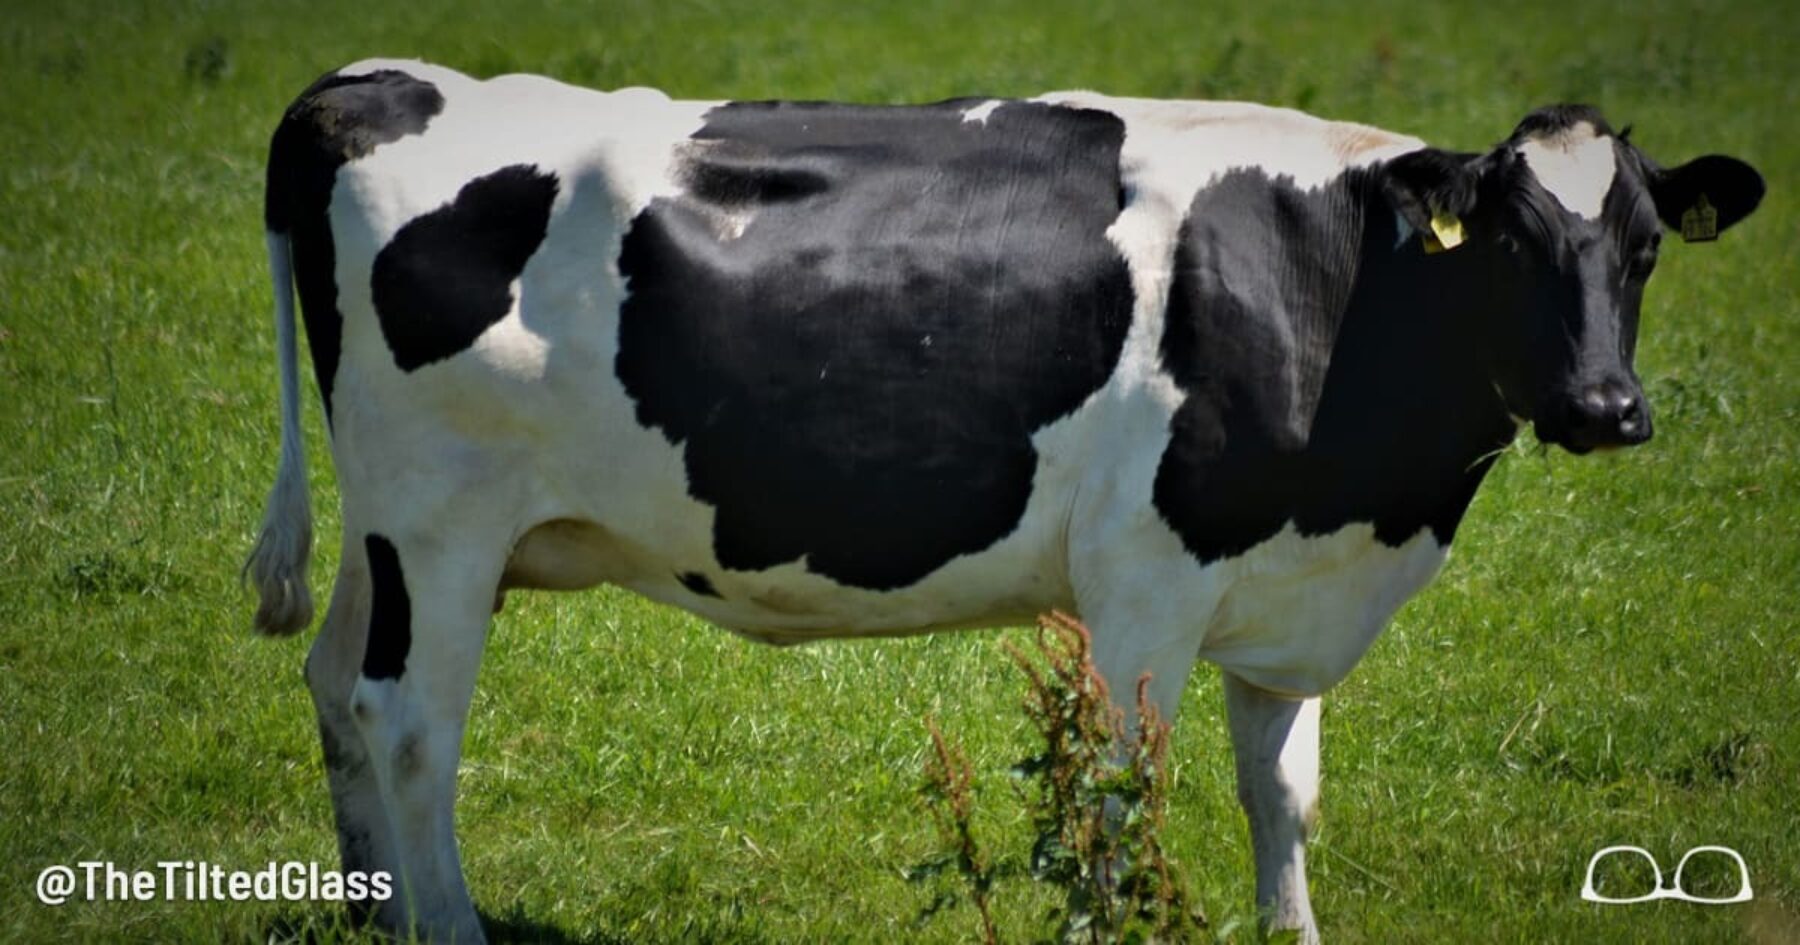 This Cow Has Written an Article to Make You Feel Loved